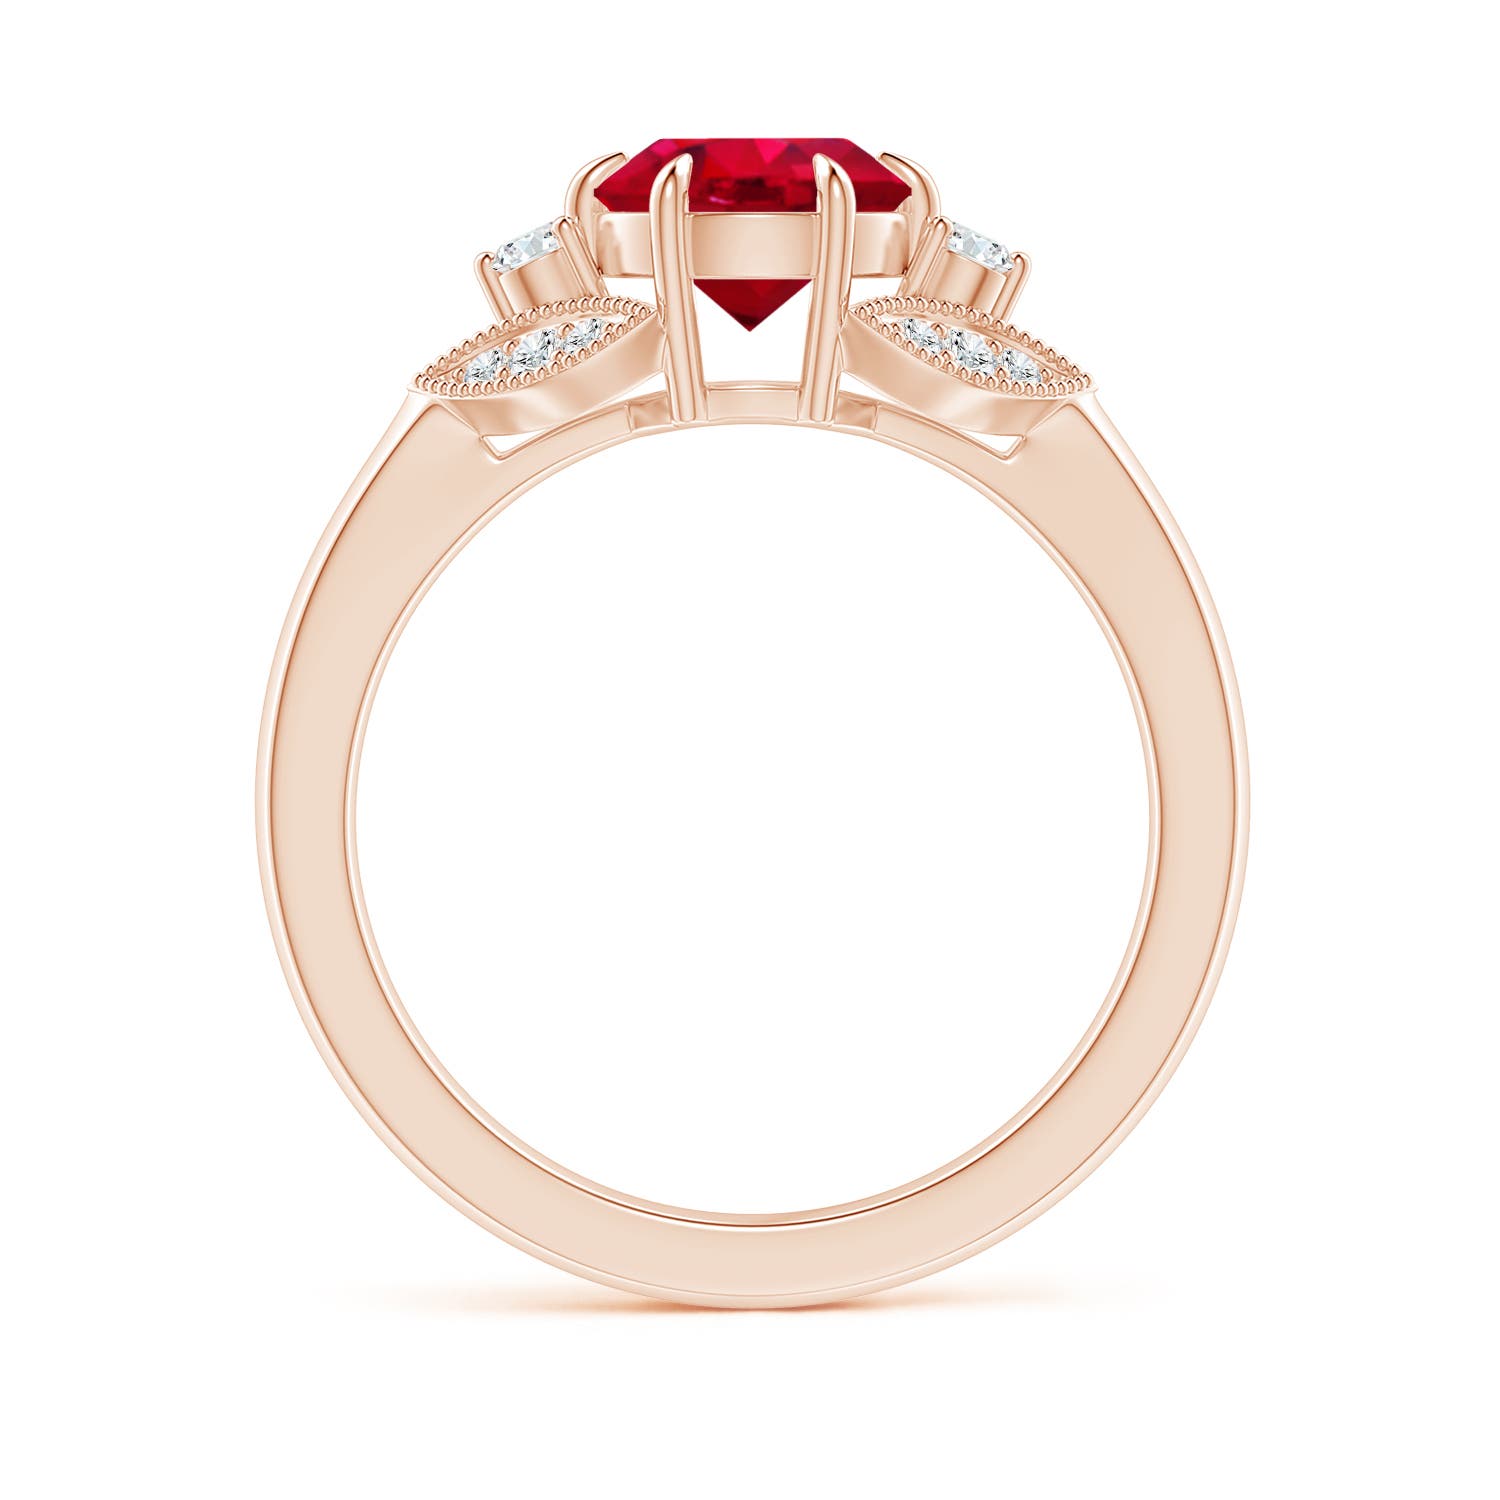 AAA - Ruby / 1.64 CT / 14 KT Rose Gold